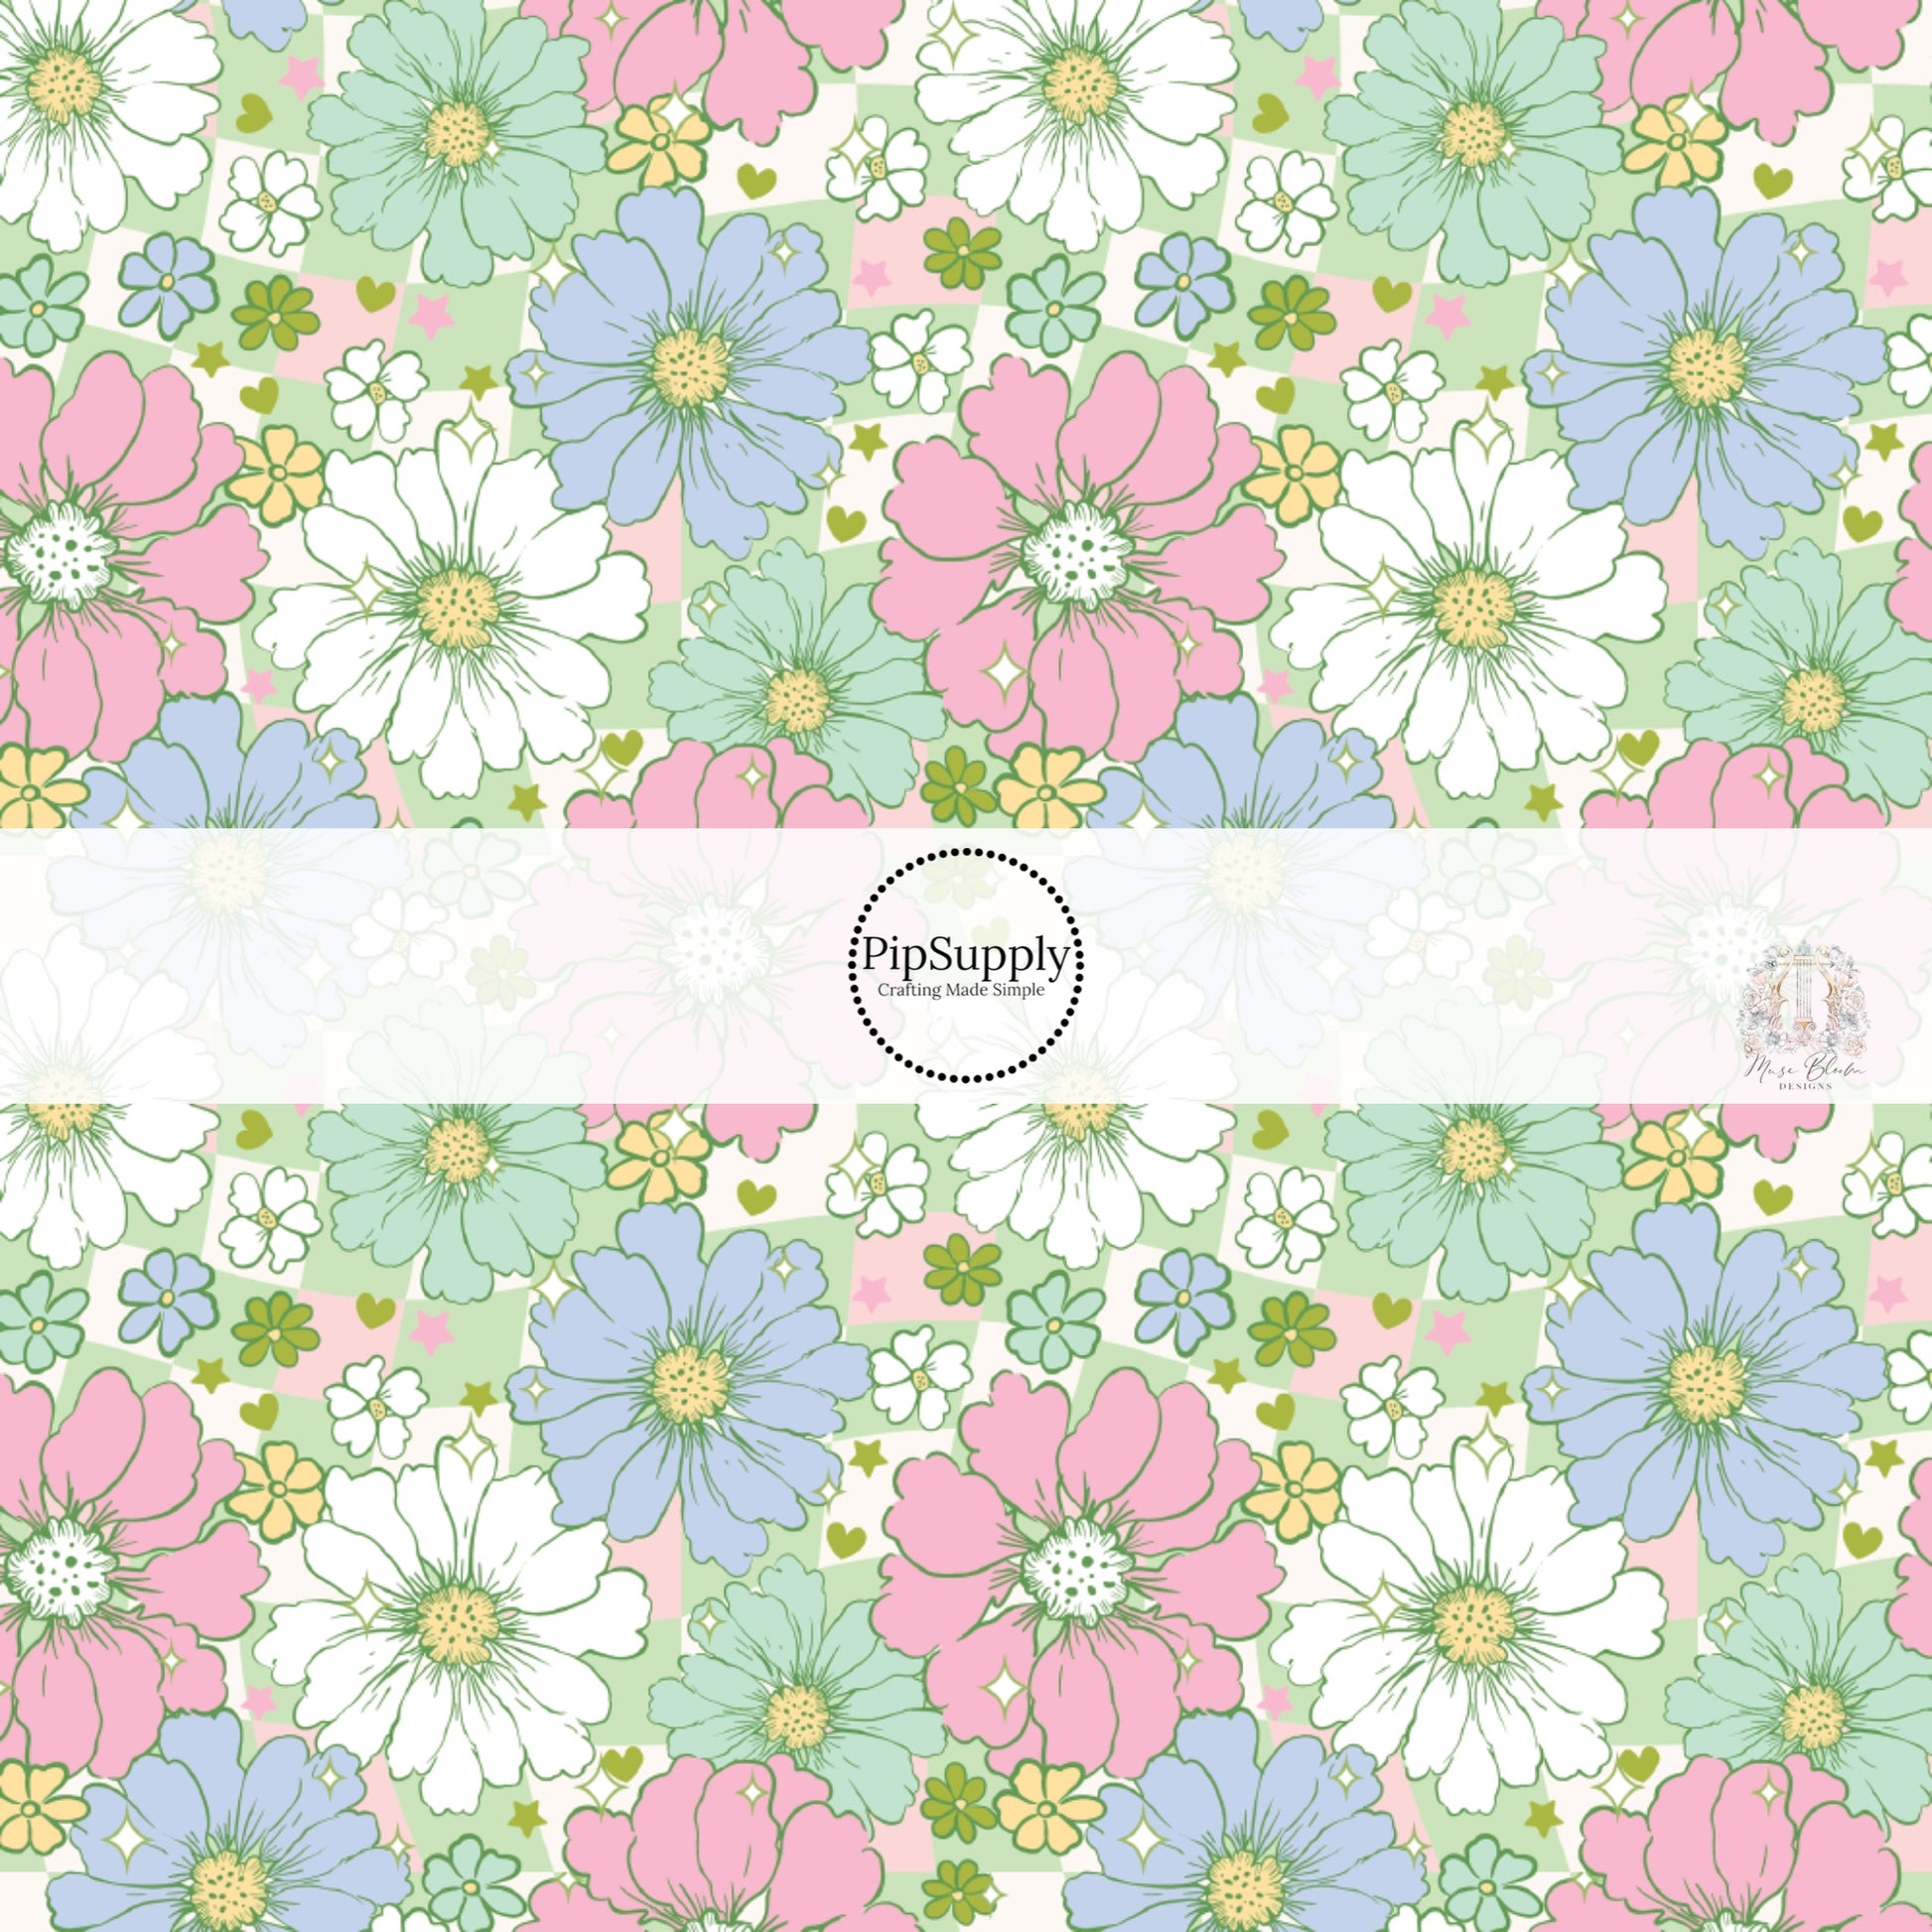 Light pink, green, blue, and white flowers on a green and cream checker board pattern fabric by the yard.